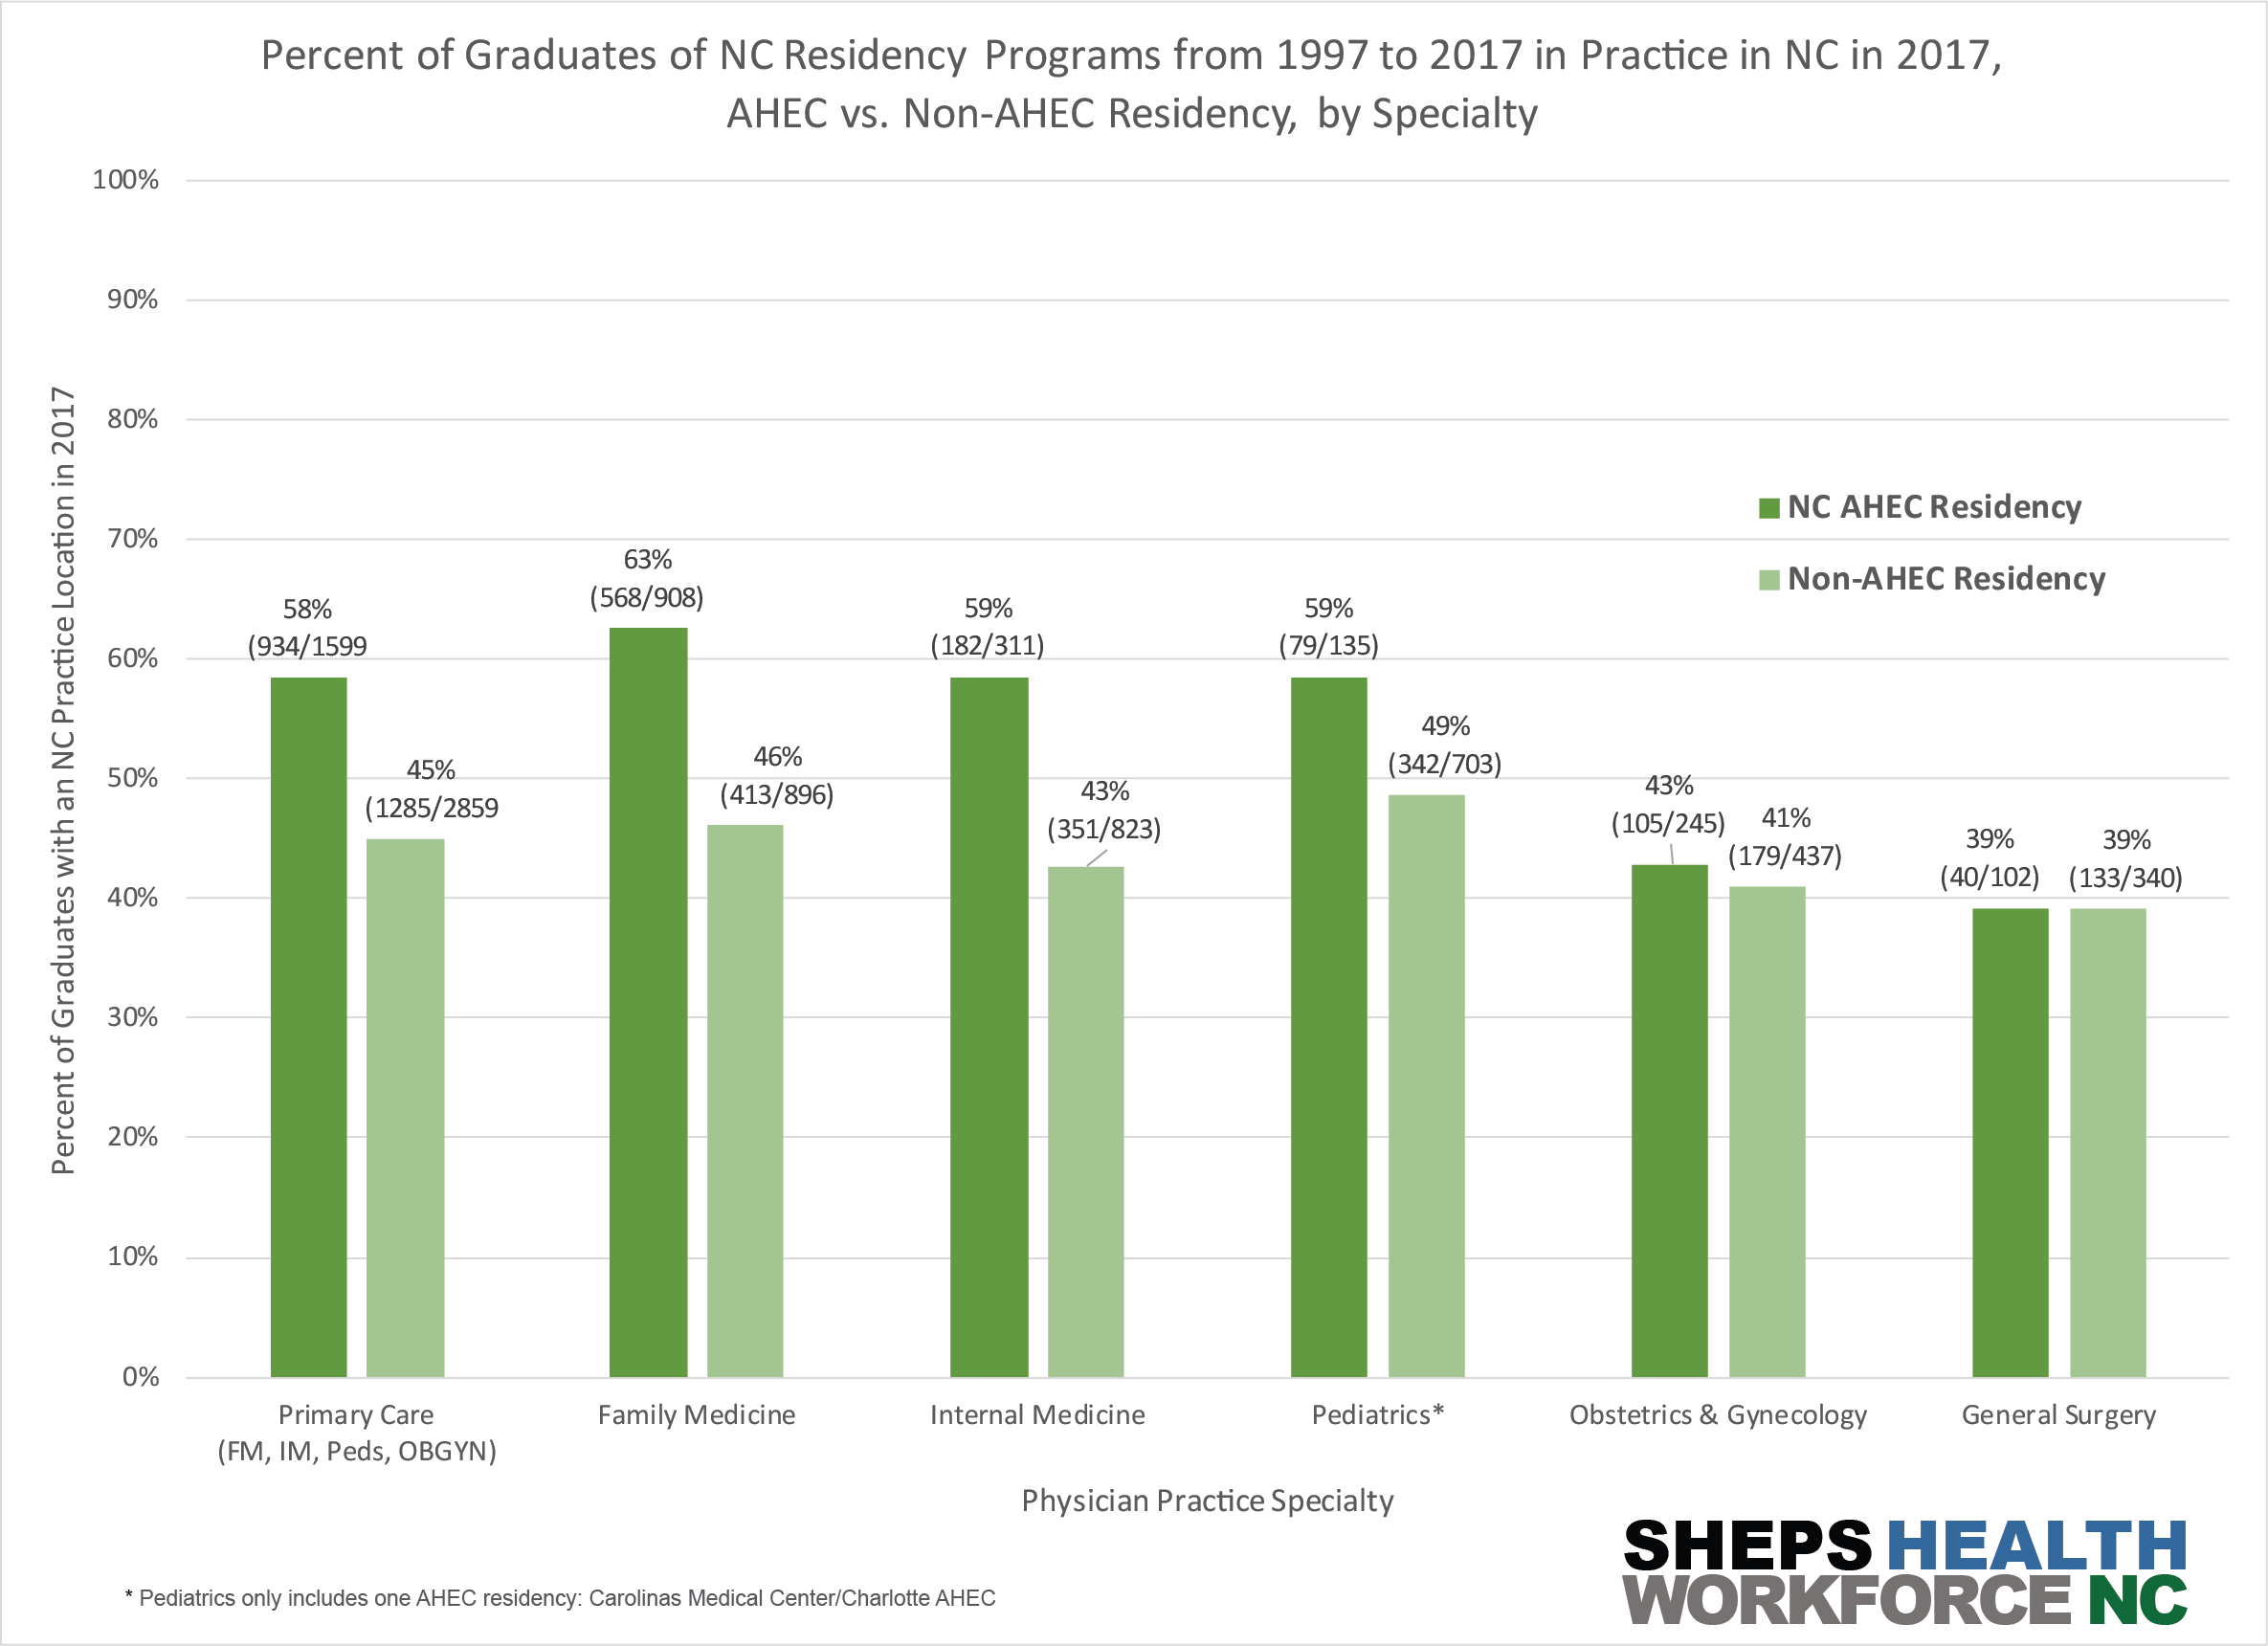 Percentage of graduates of NC residency programs from 1997 to 2017 in practice in NC in 2017, AHEC vs Non-AHEC residency, by Specialty